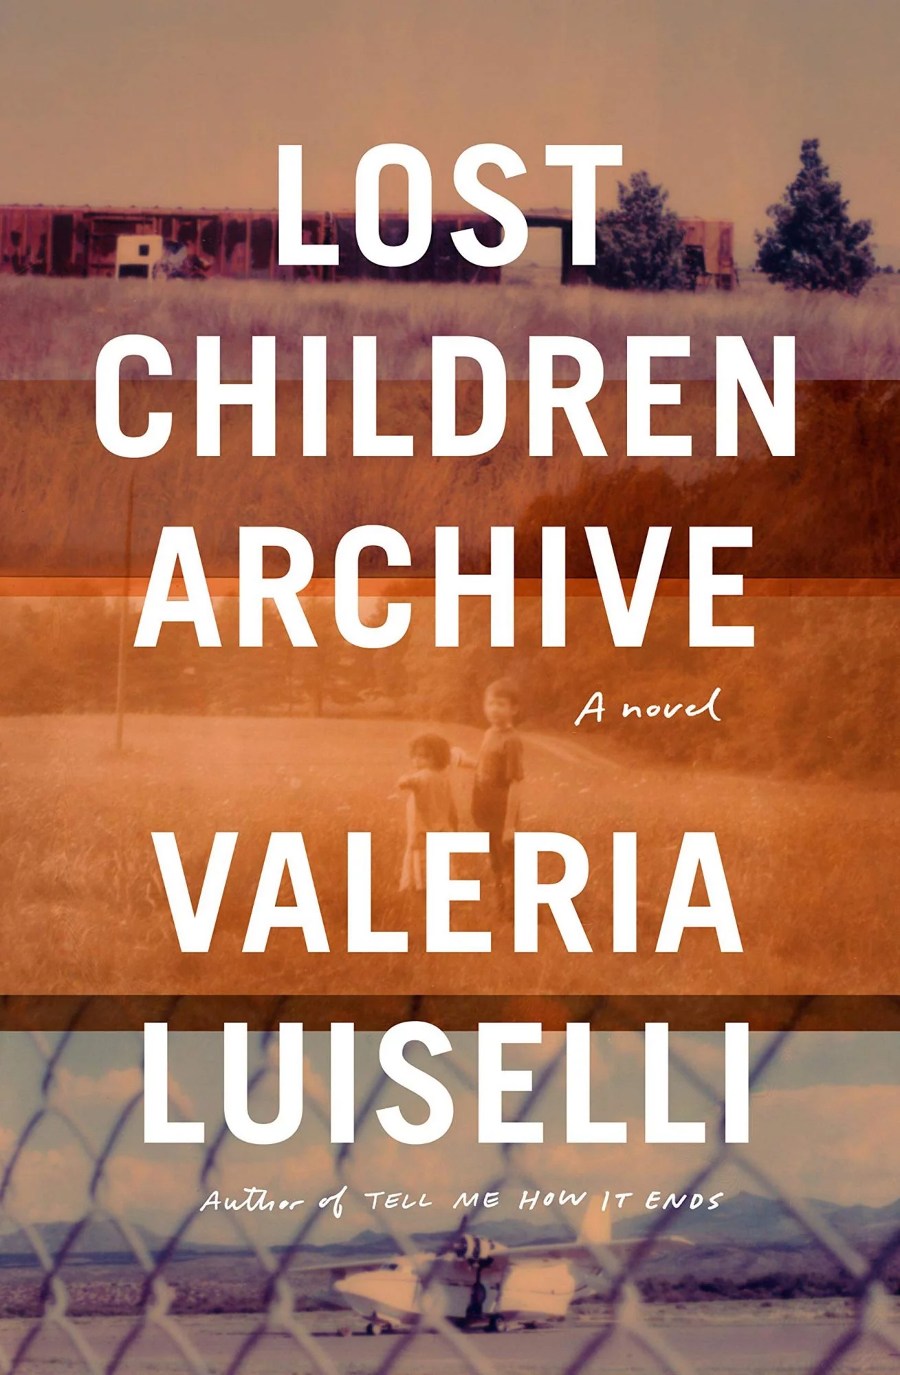 valeria luiselli books for gifts